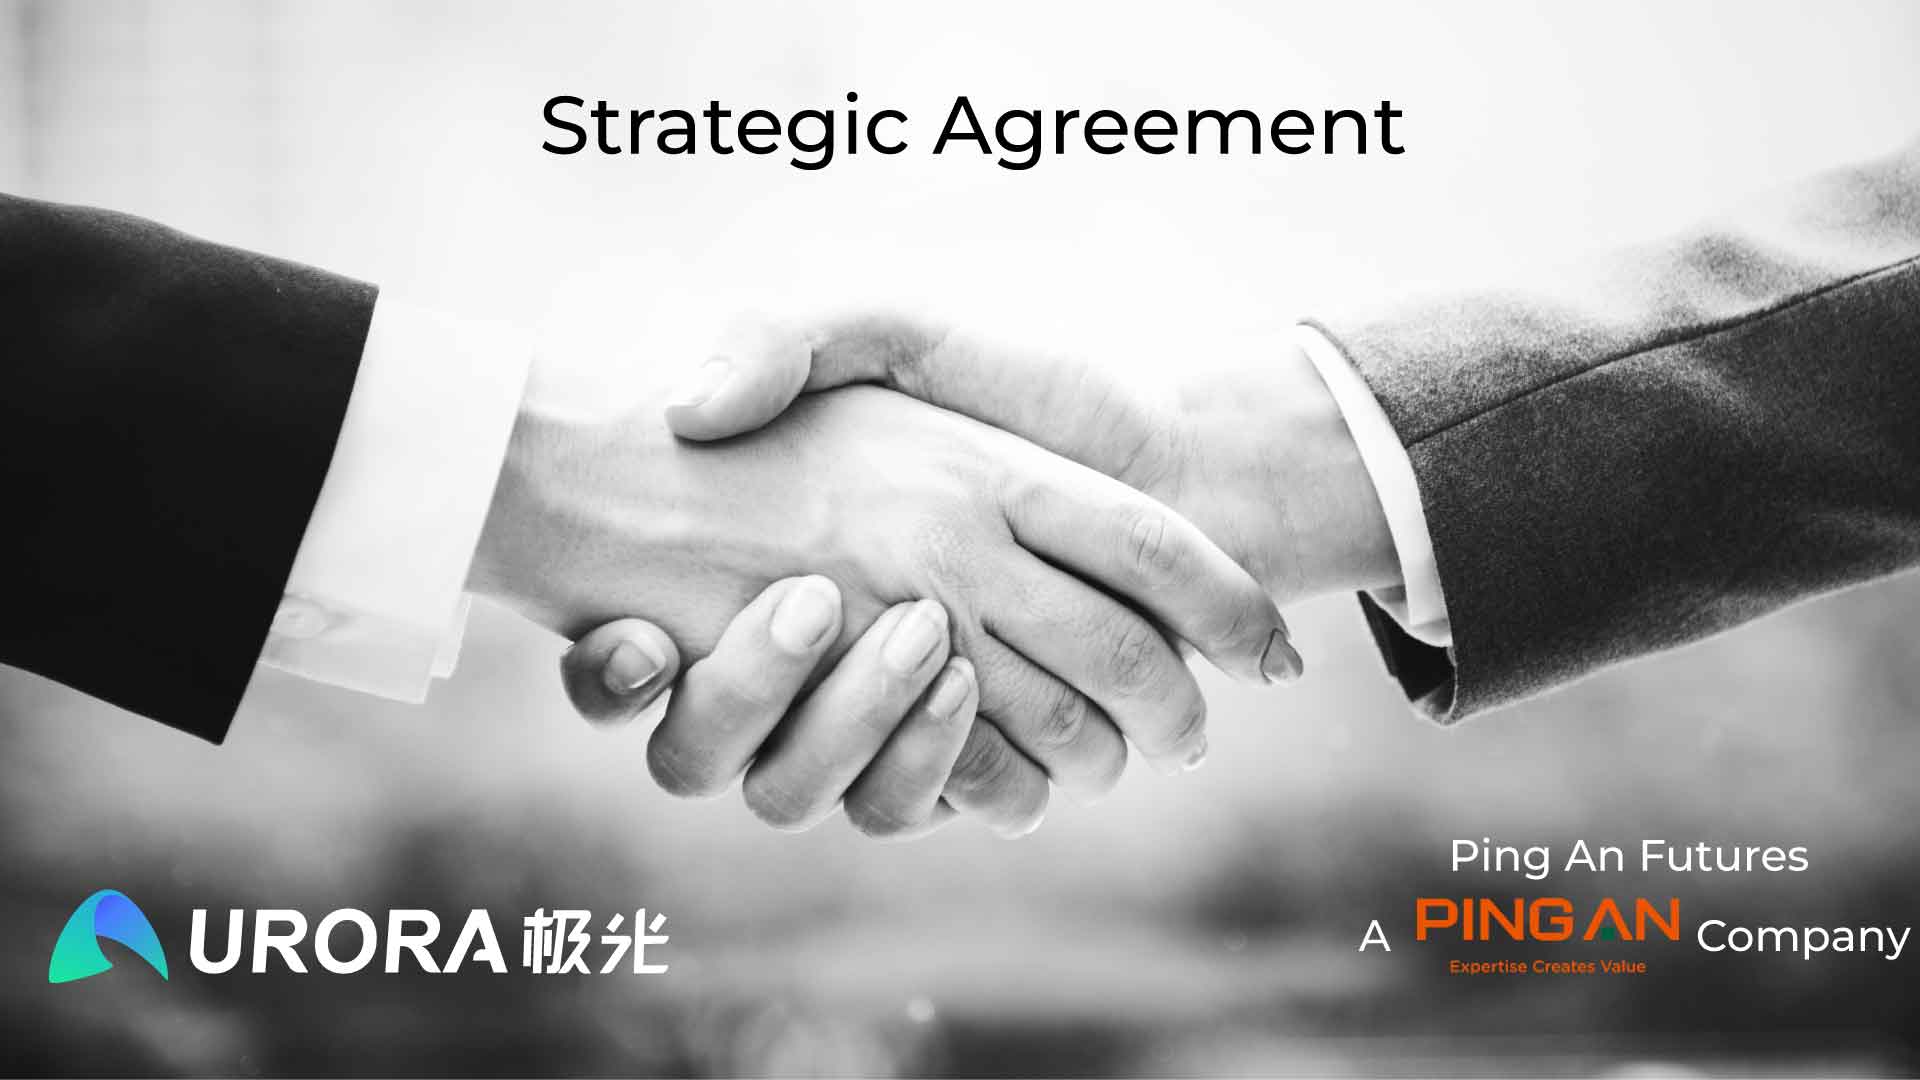 Aurora Mobile Partners with Ping An Futures to Help Optimize Customer Engagement